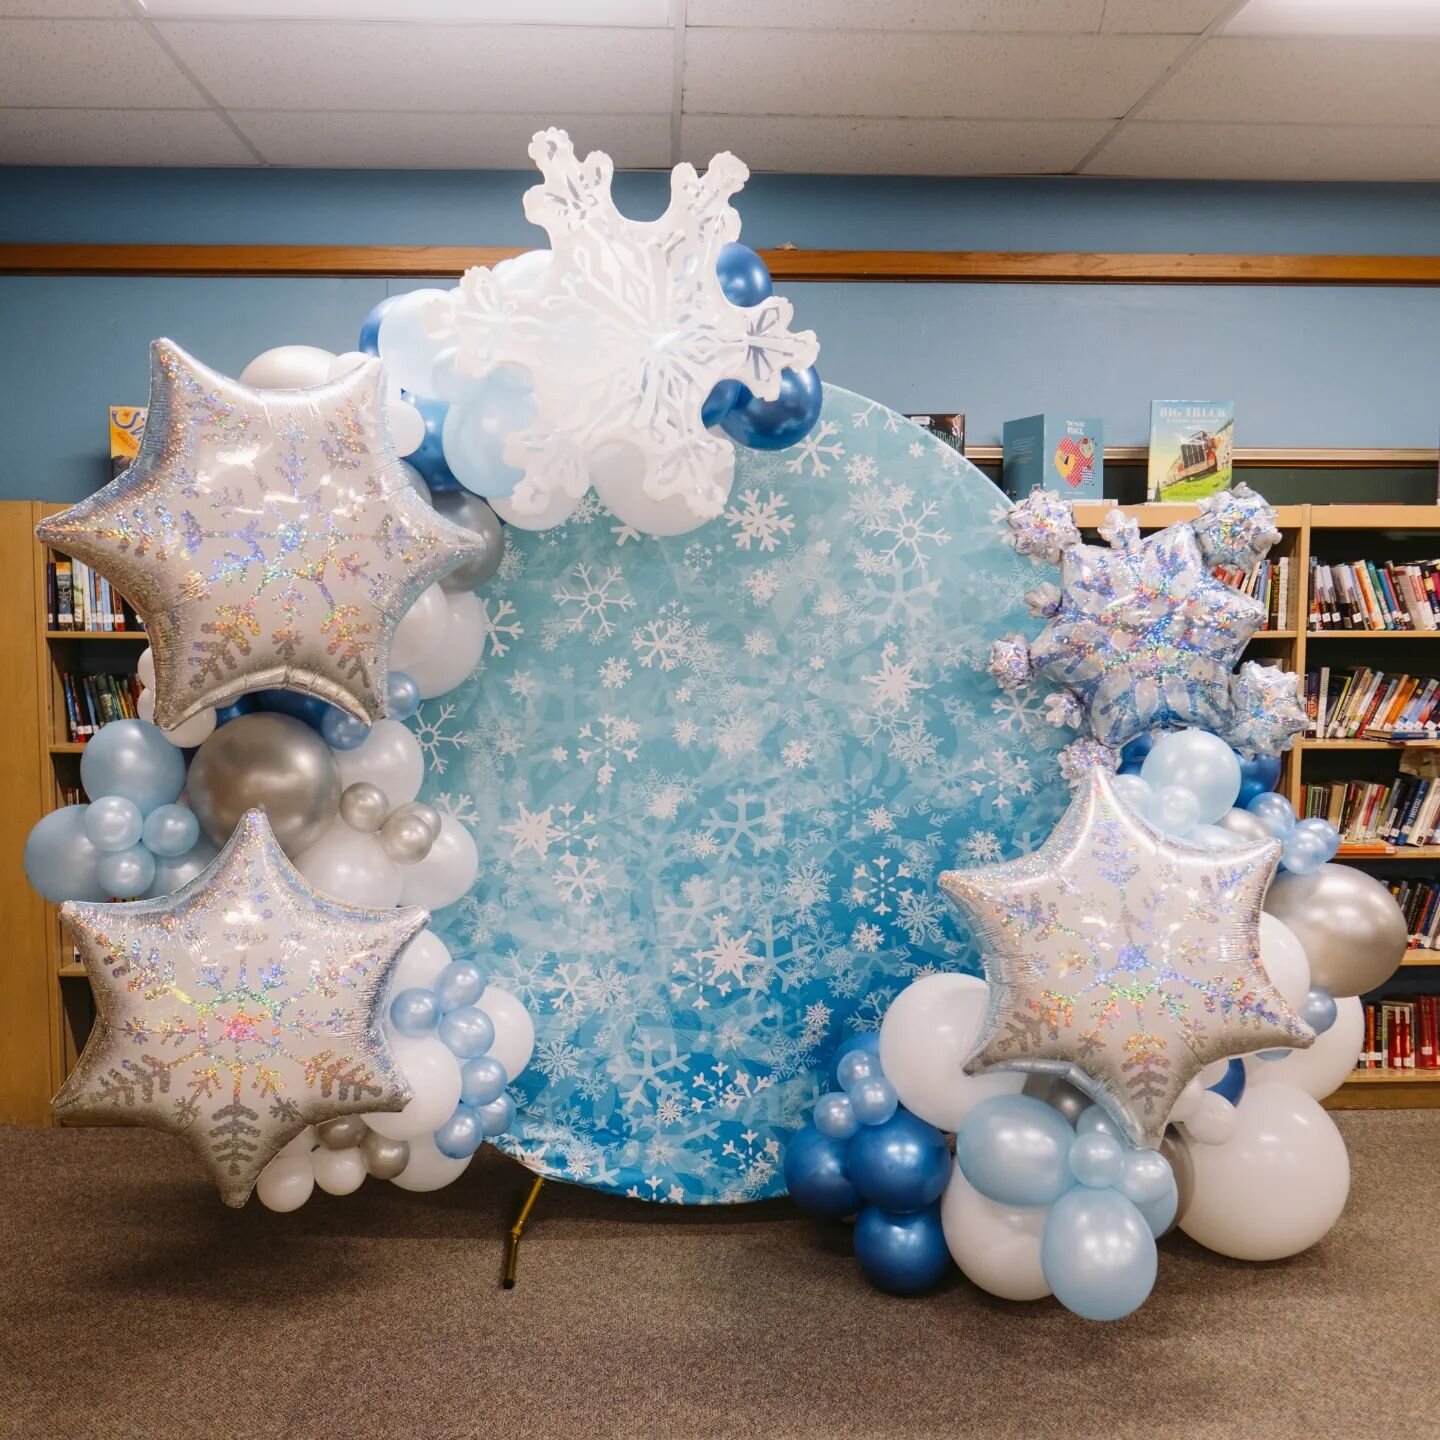 Happy February! 
If these are the only snowflakes I see this month, I won't be mad about it (global warming issues aside 😅)

Thanks for all the fun last week at Winterfest, @oaktonpta!